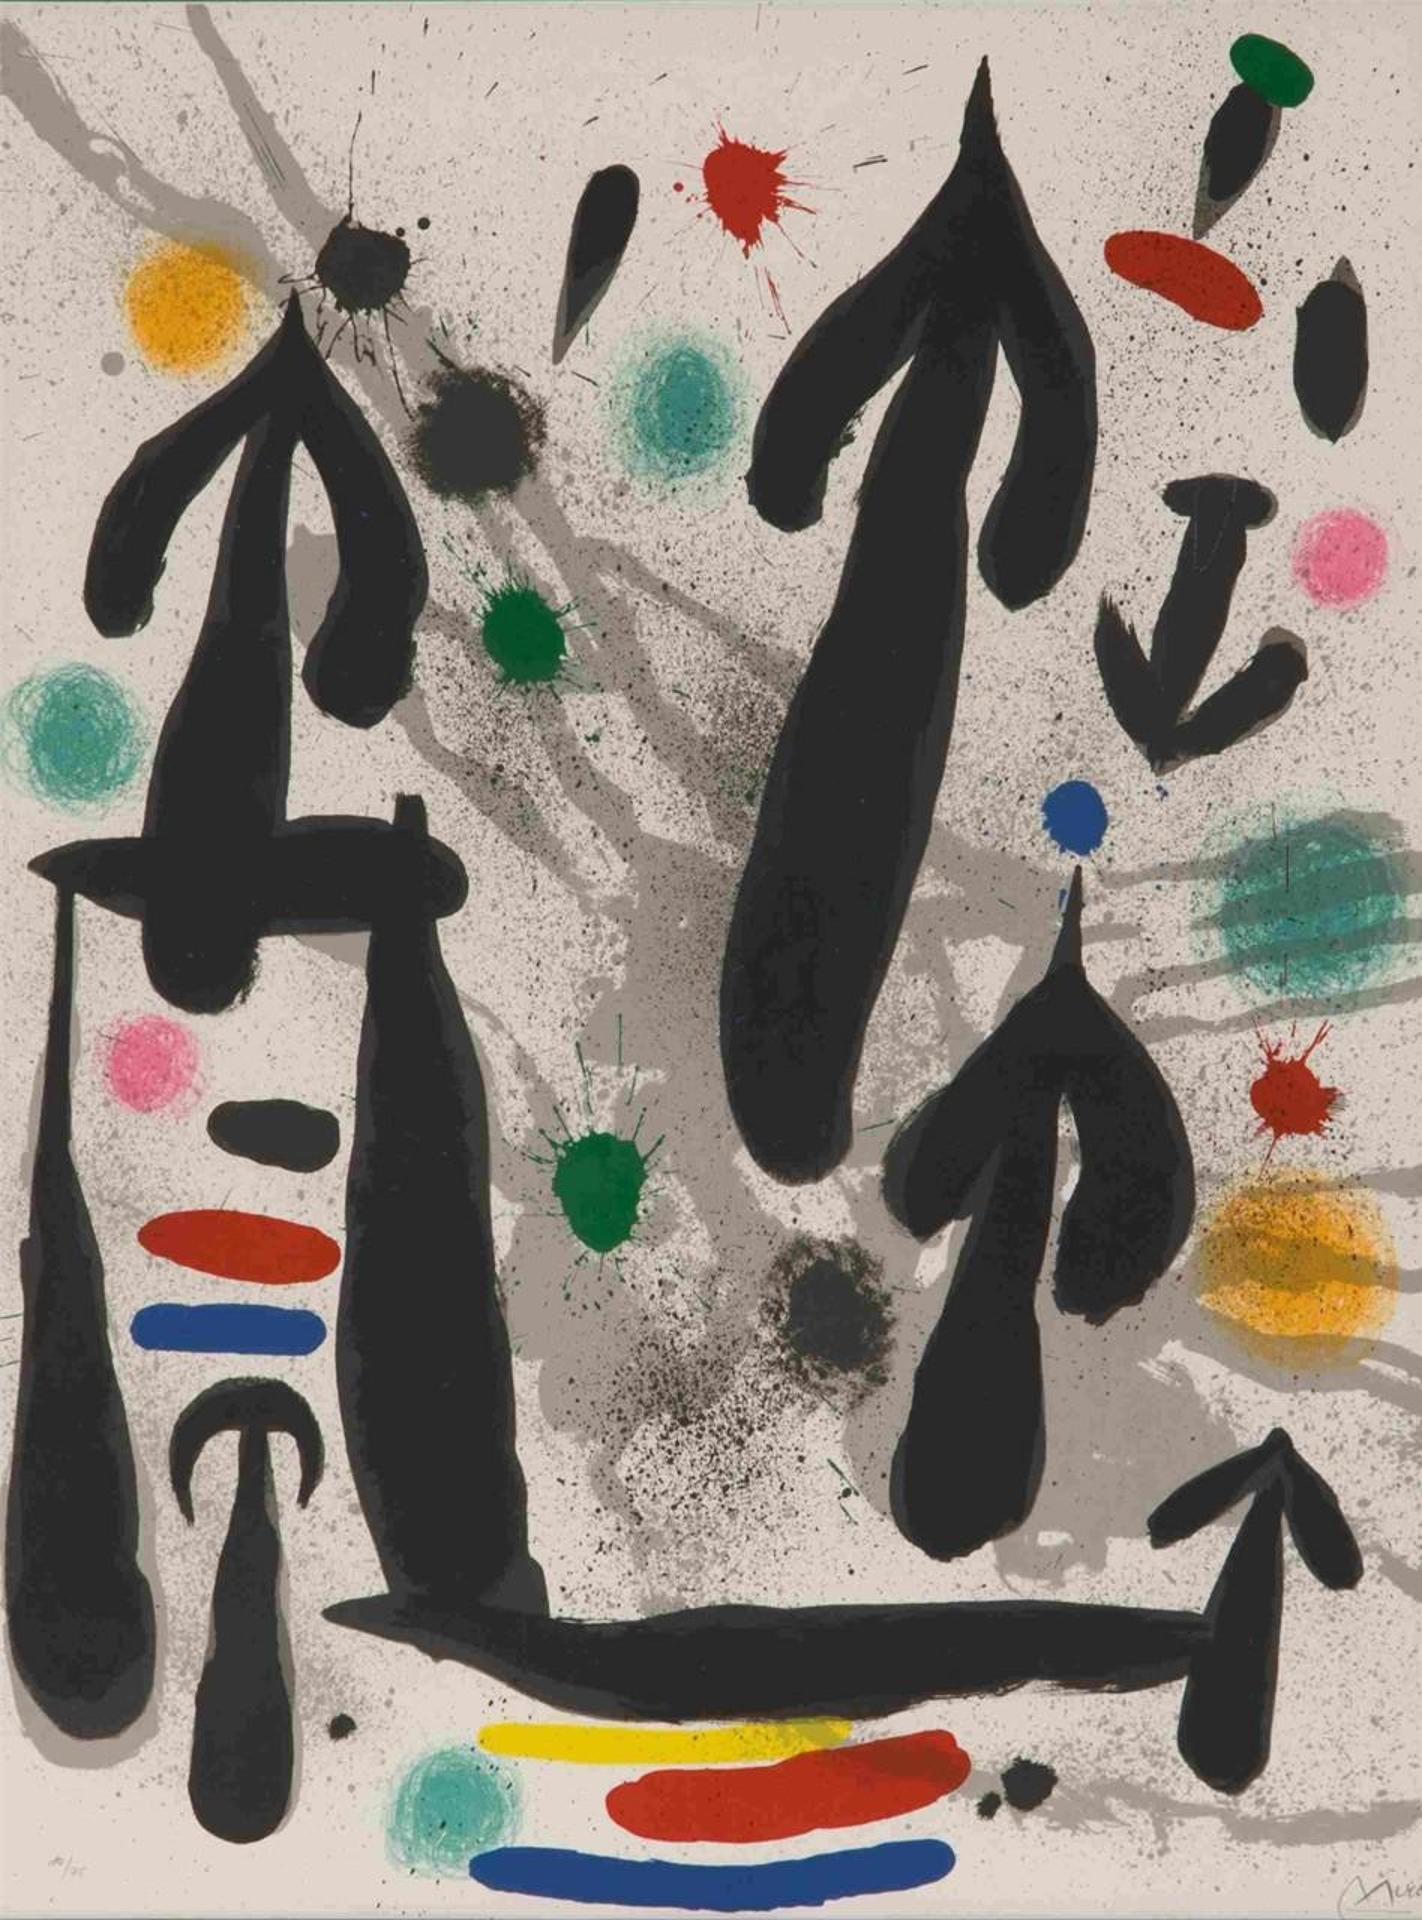 Joan Miró (1893-1983) - Plate IV from Les Perseides